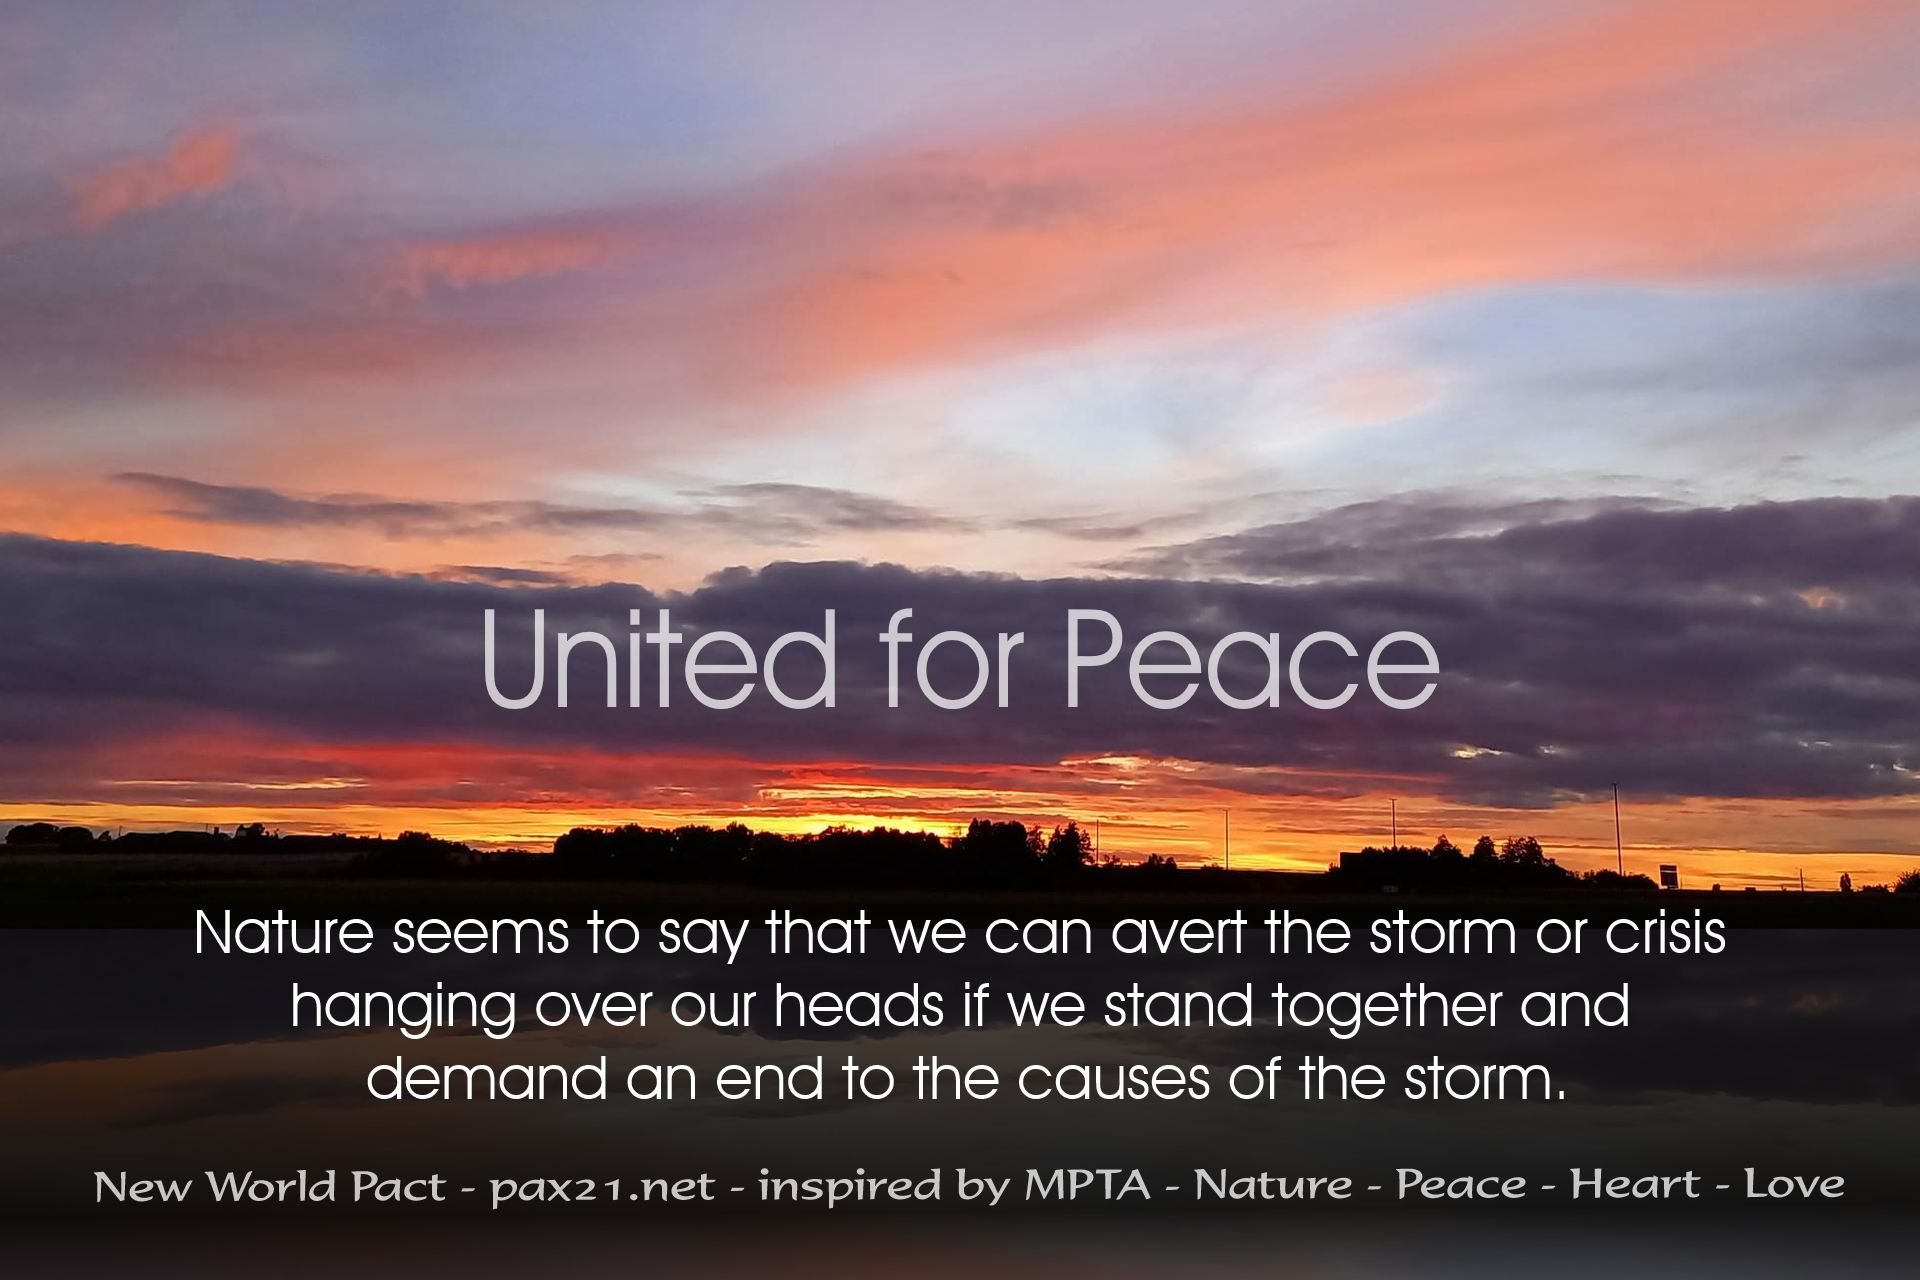 United for Peace